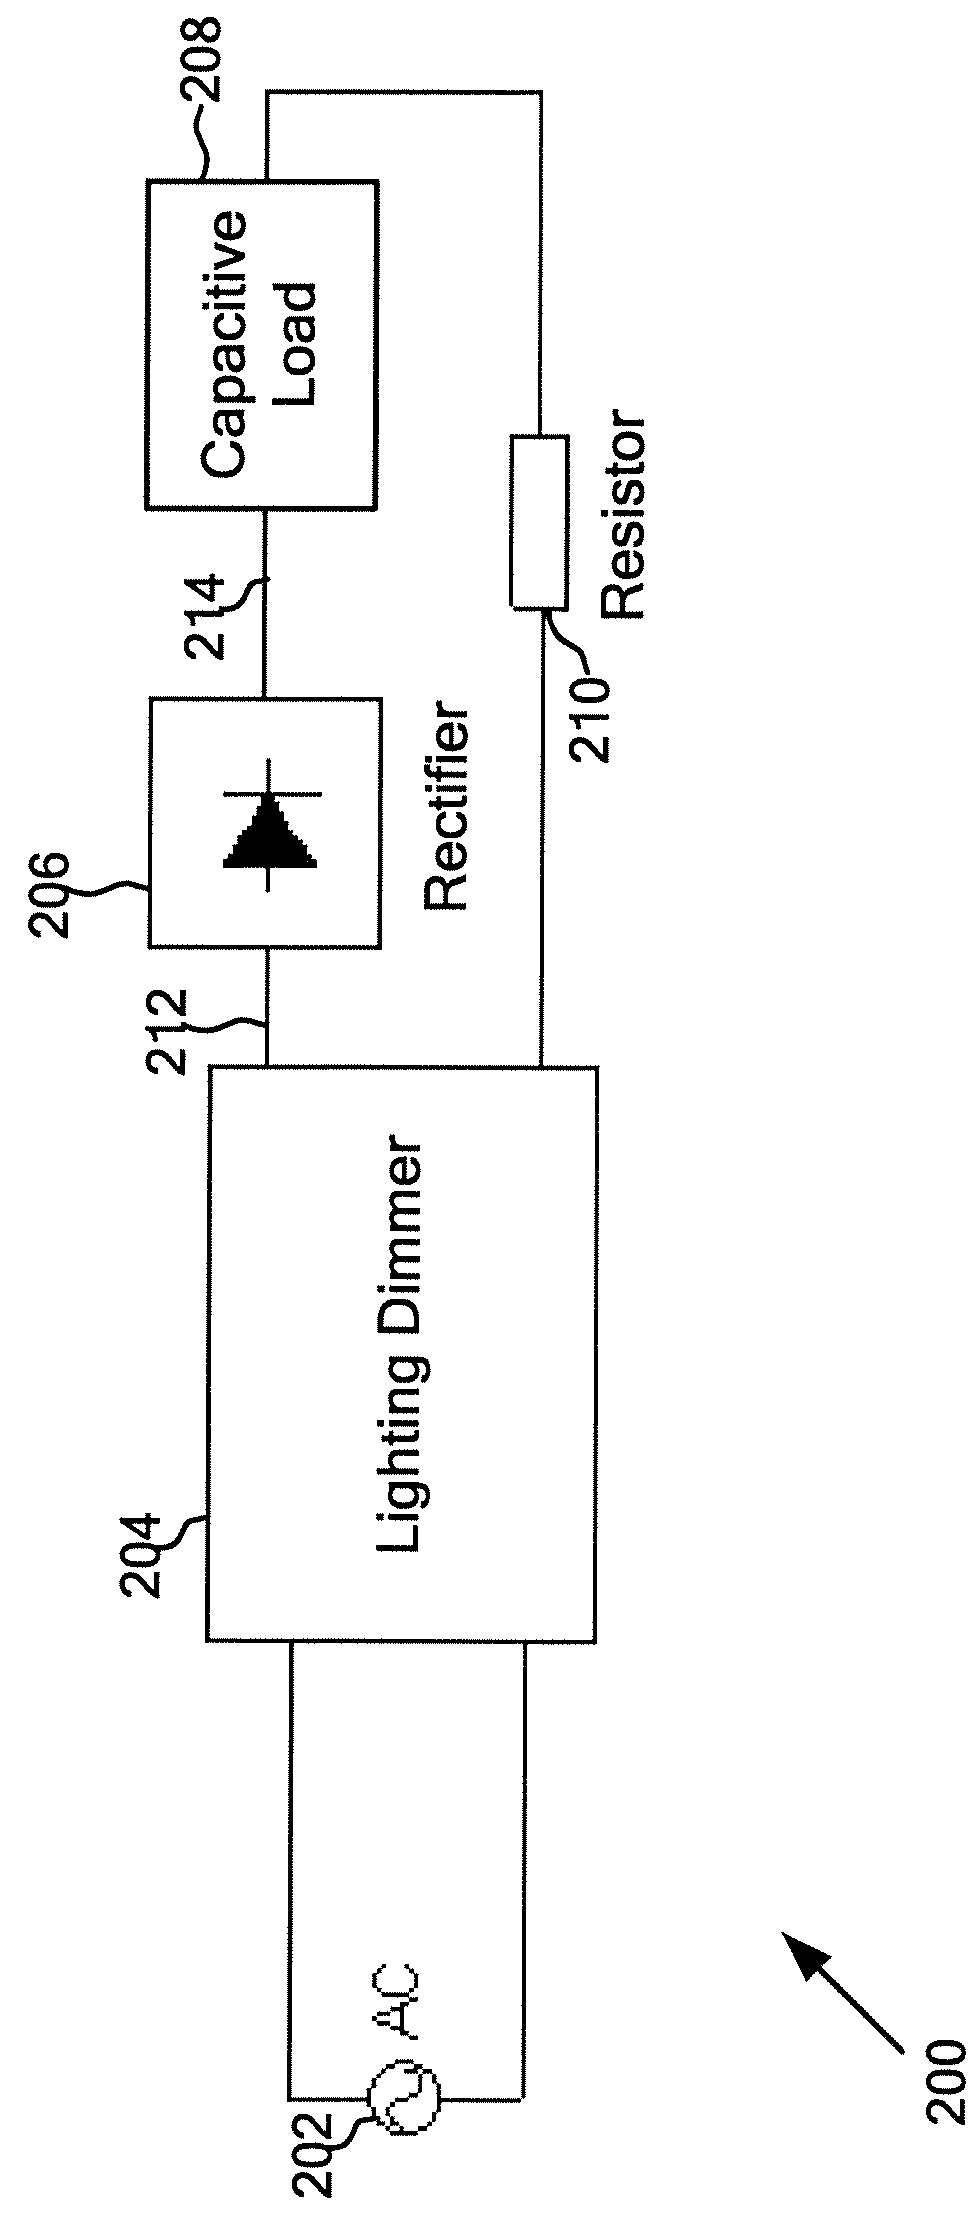 Systems and methods for dimming control using system controllers